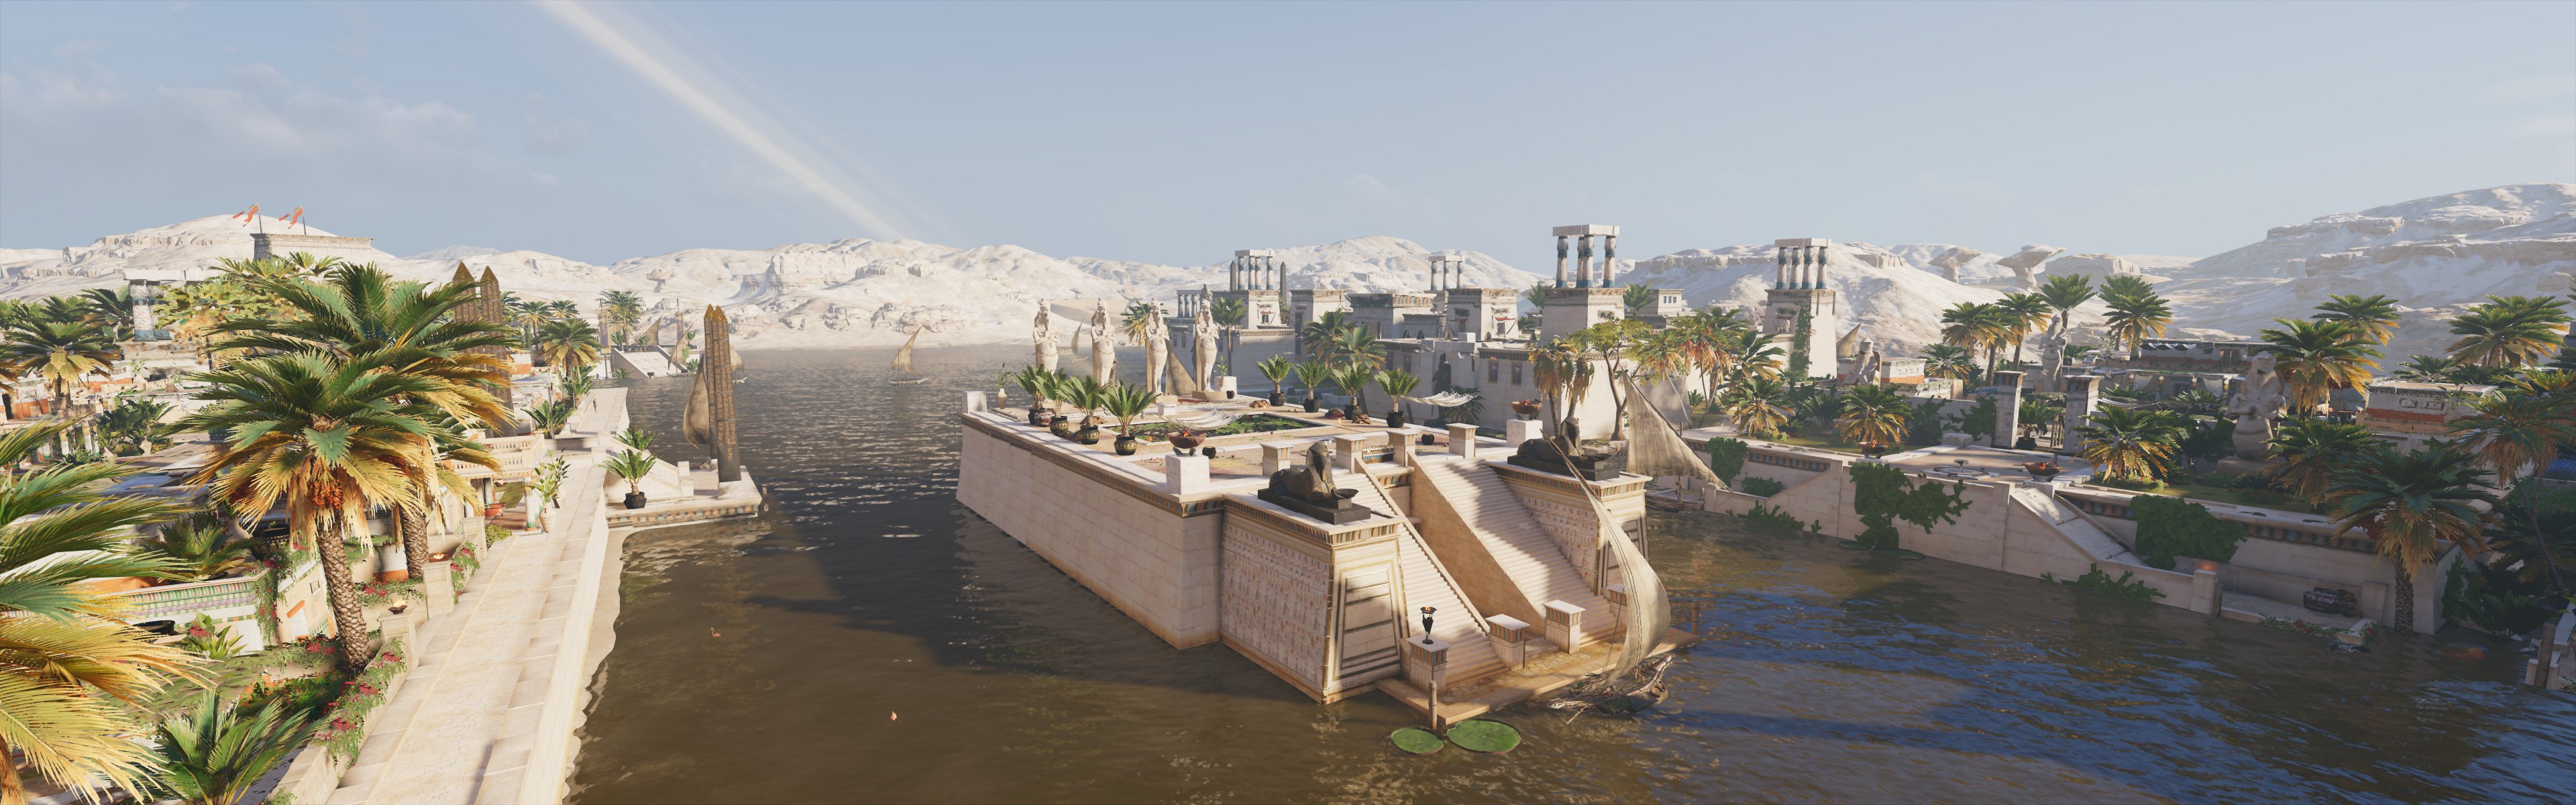 Egypt Wide Angle Assassins Creed Origins Video Games CGi Sky Clouds Water City Trees Palm Trees 3840x1200